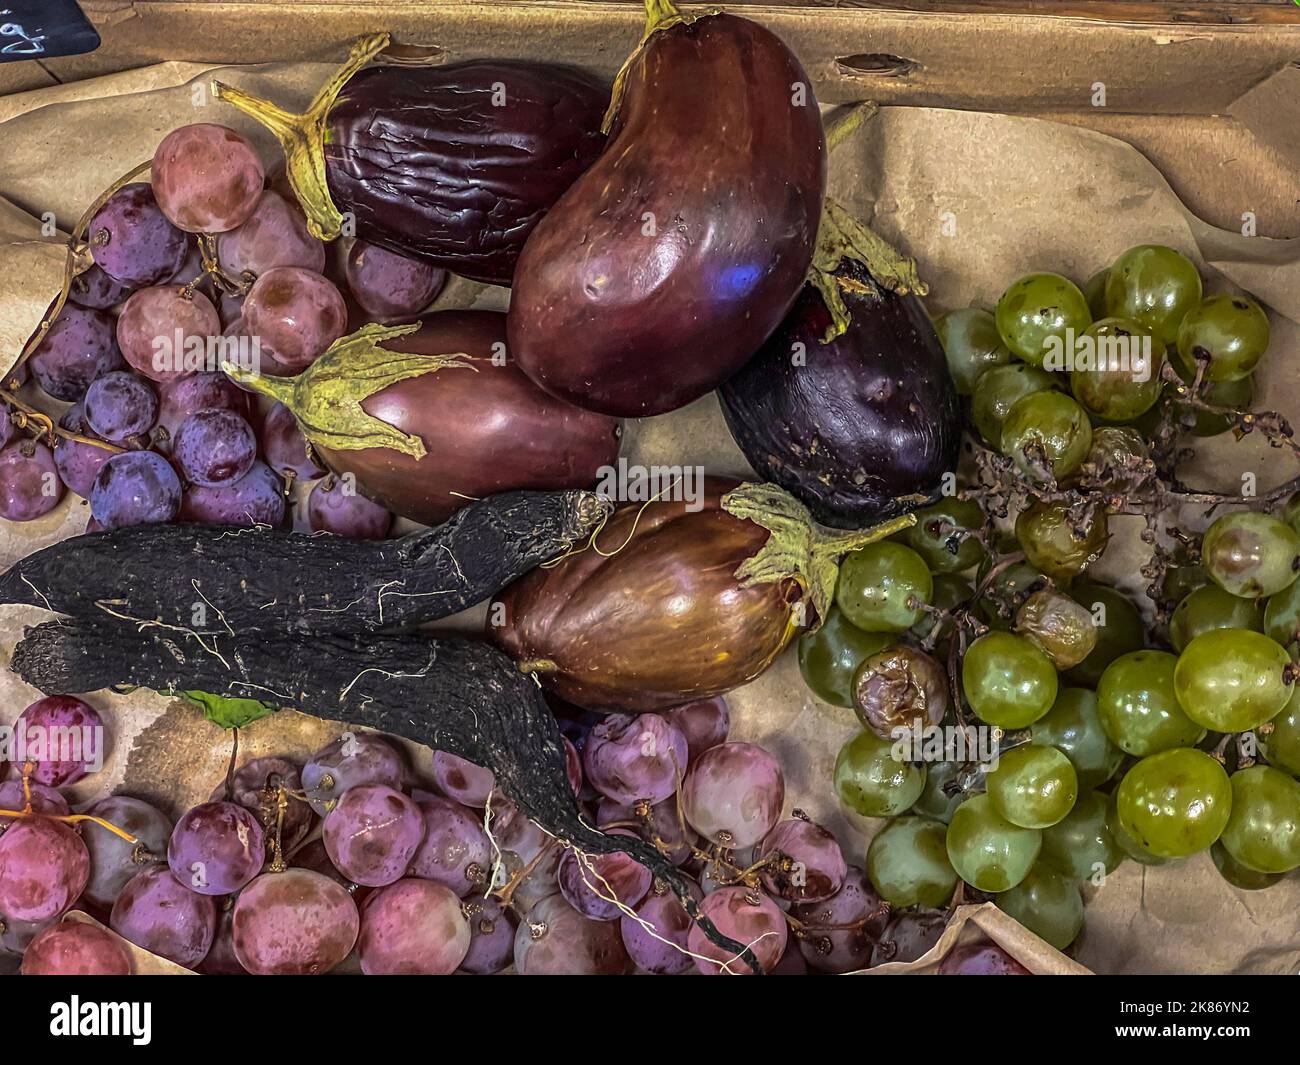 loose sale, rotten fruits and vegetables. Over the expiry date Stock Photo